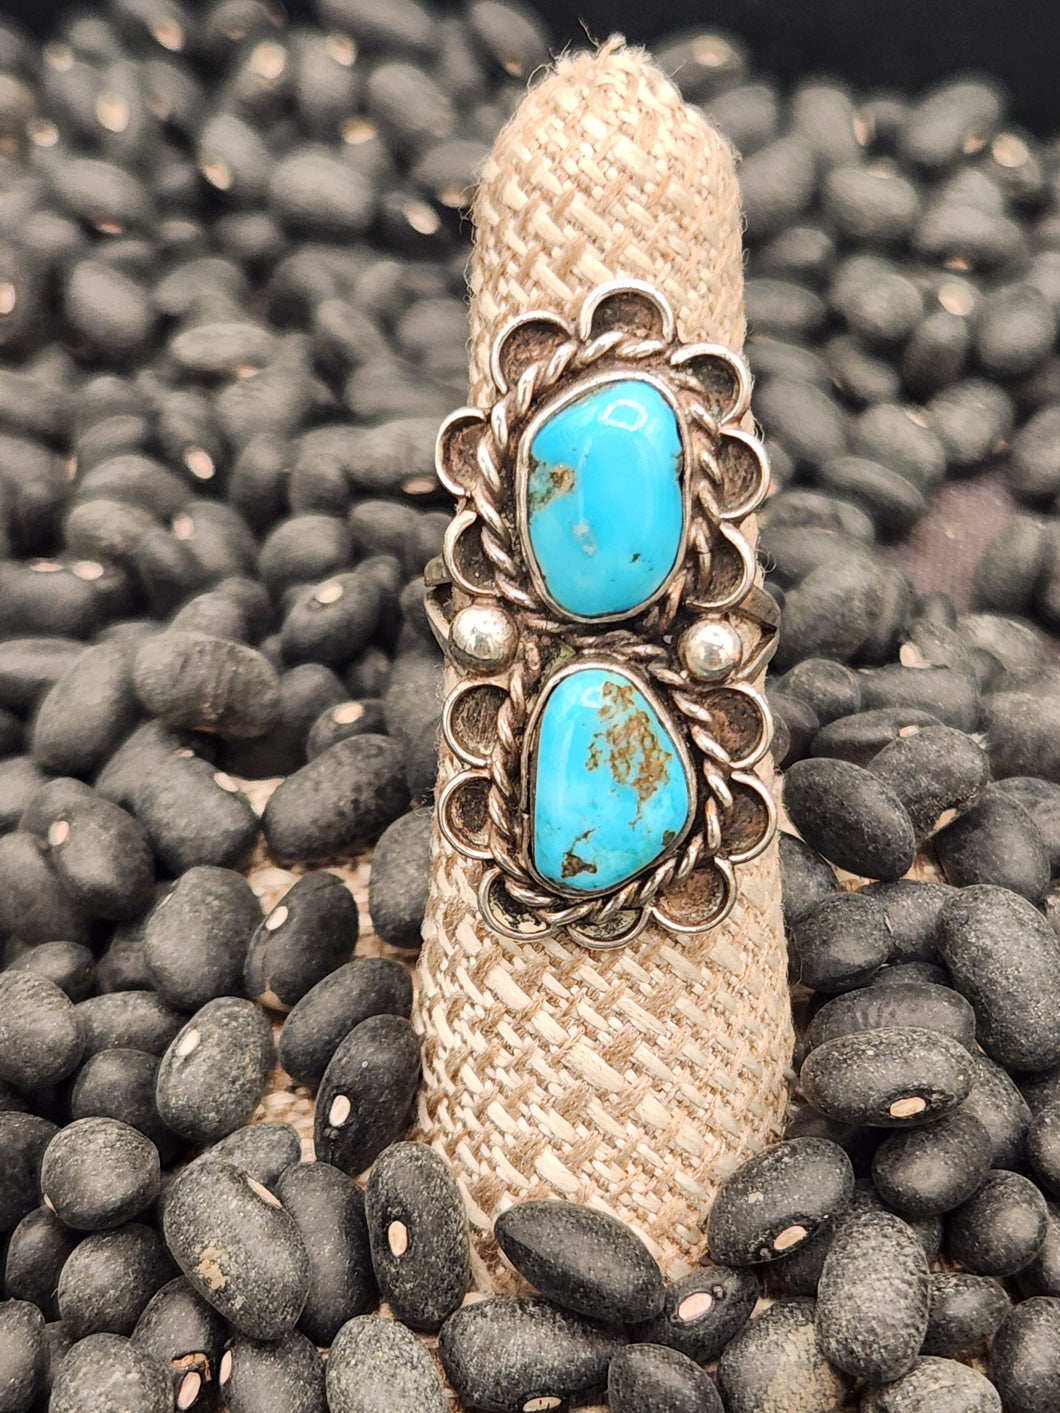 2 STONE TURQUOISE RING - SIZE 6 - NAVAJO